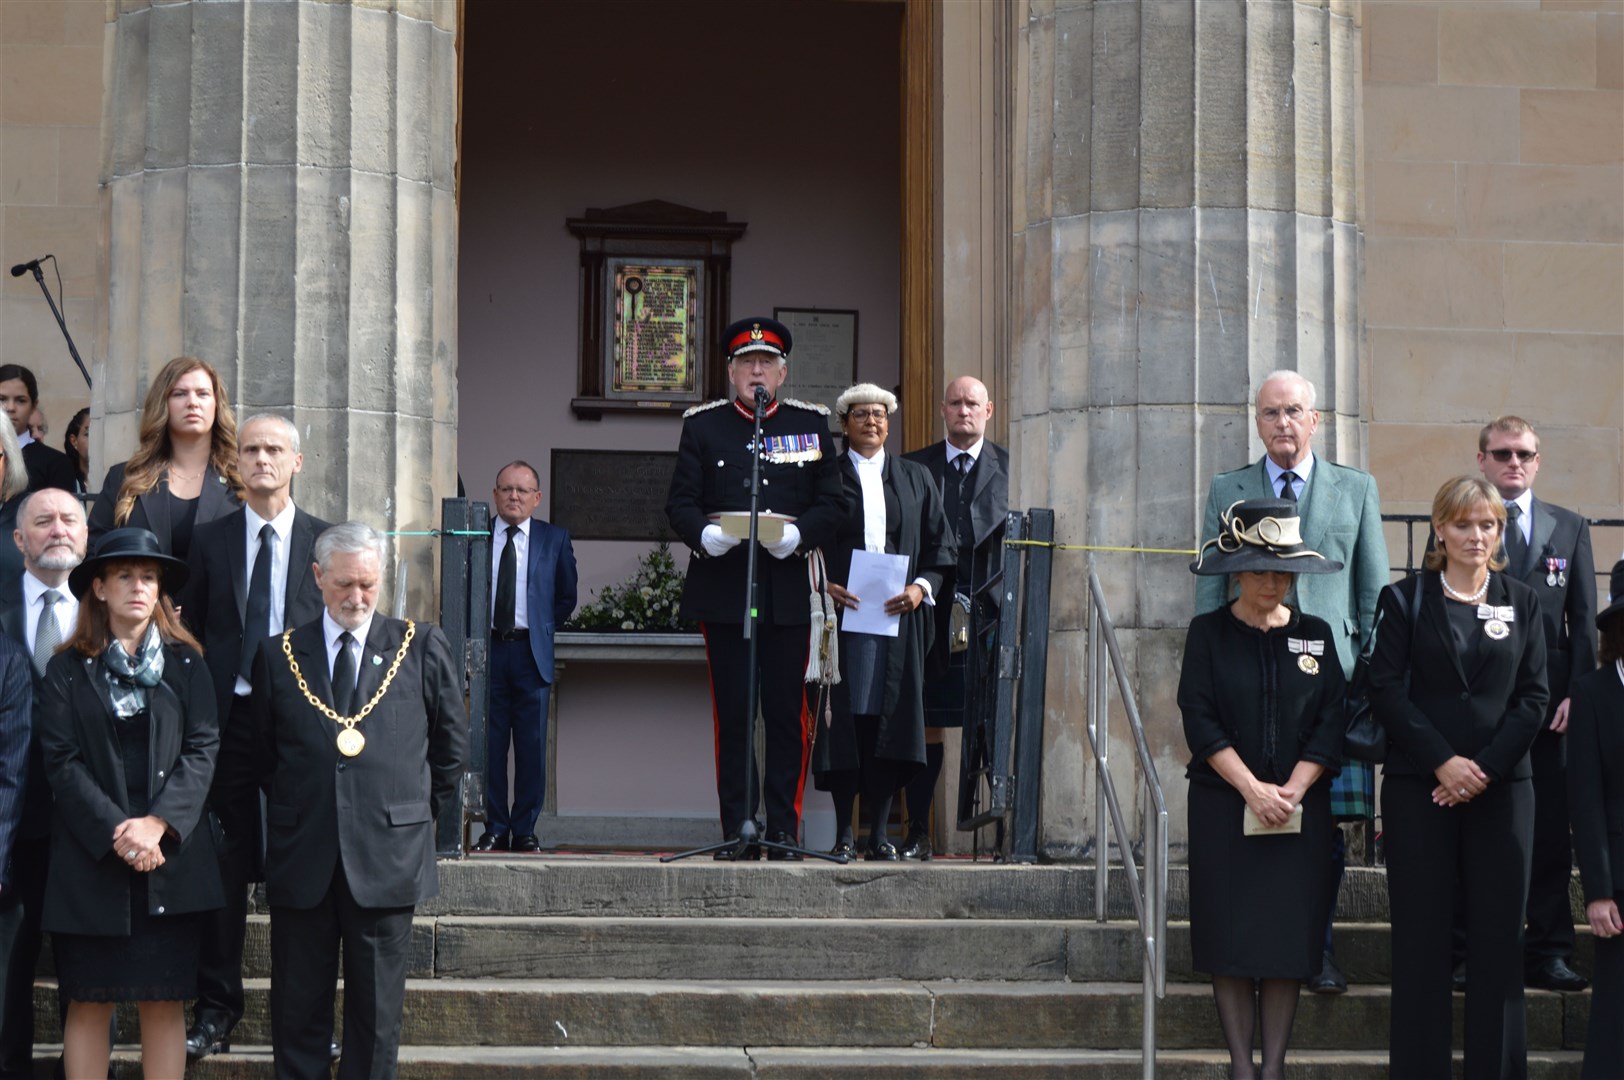 Moray dignitaries and Councillors mark the proclamation of King Charles III as the new monarch.